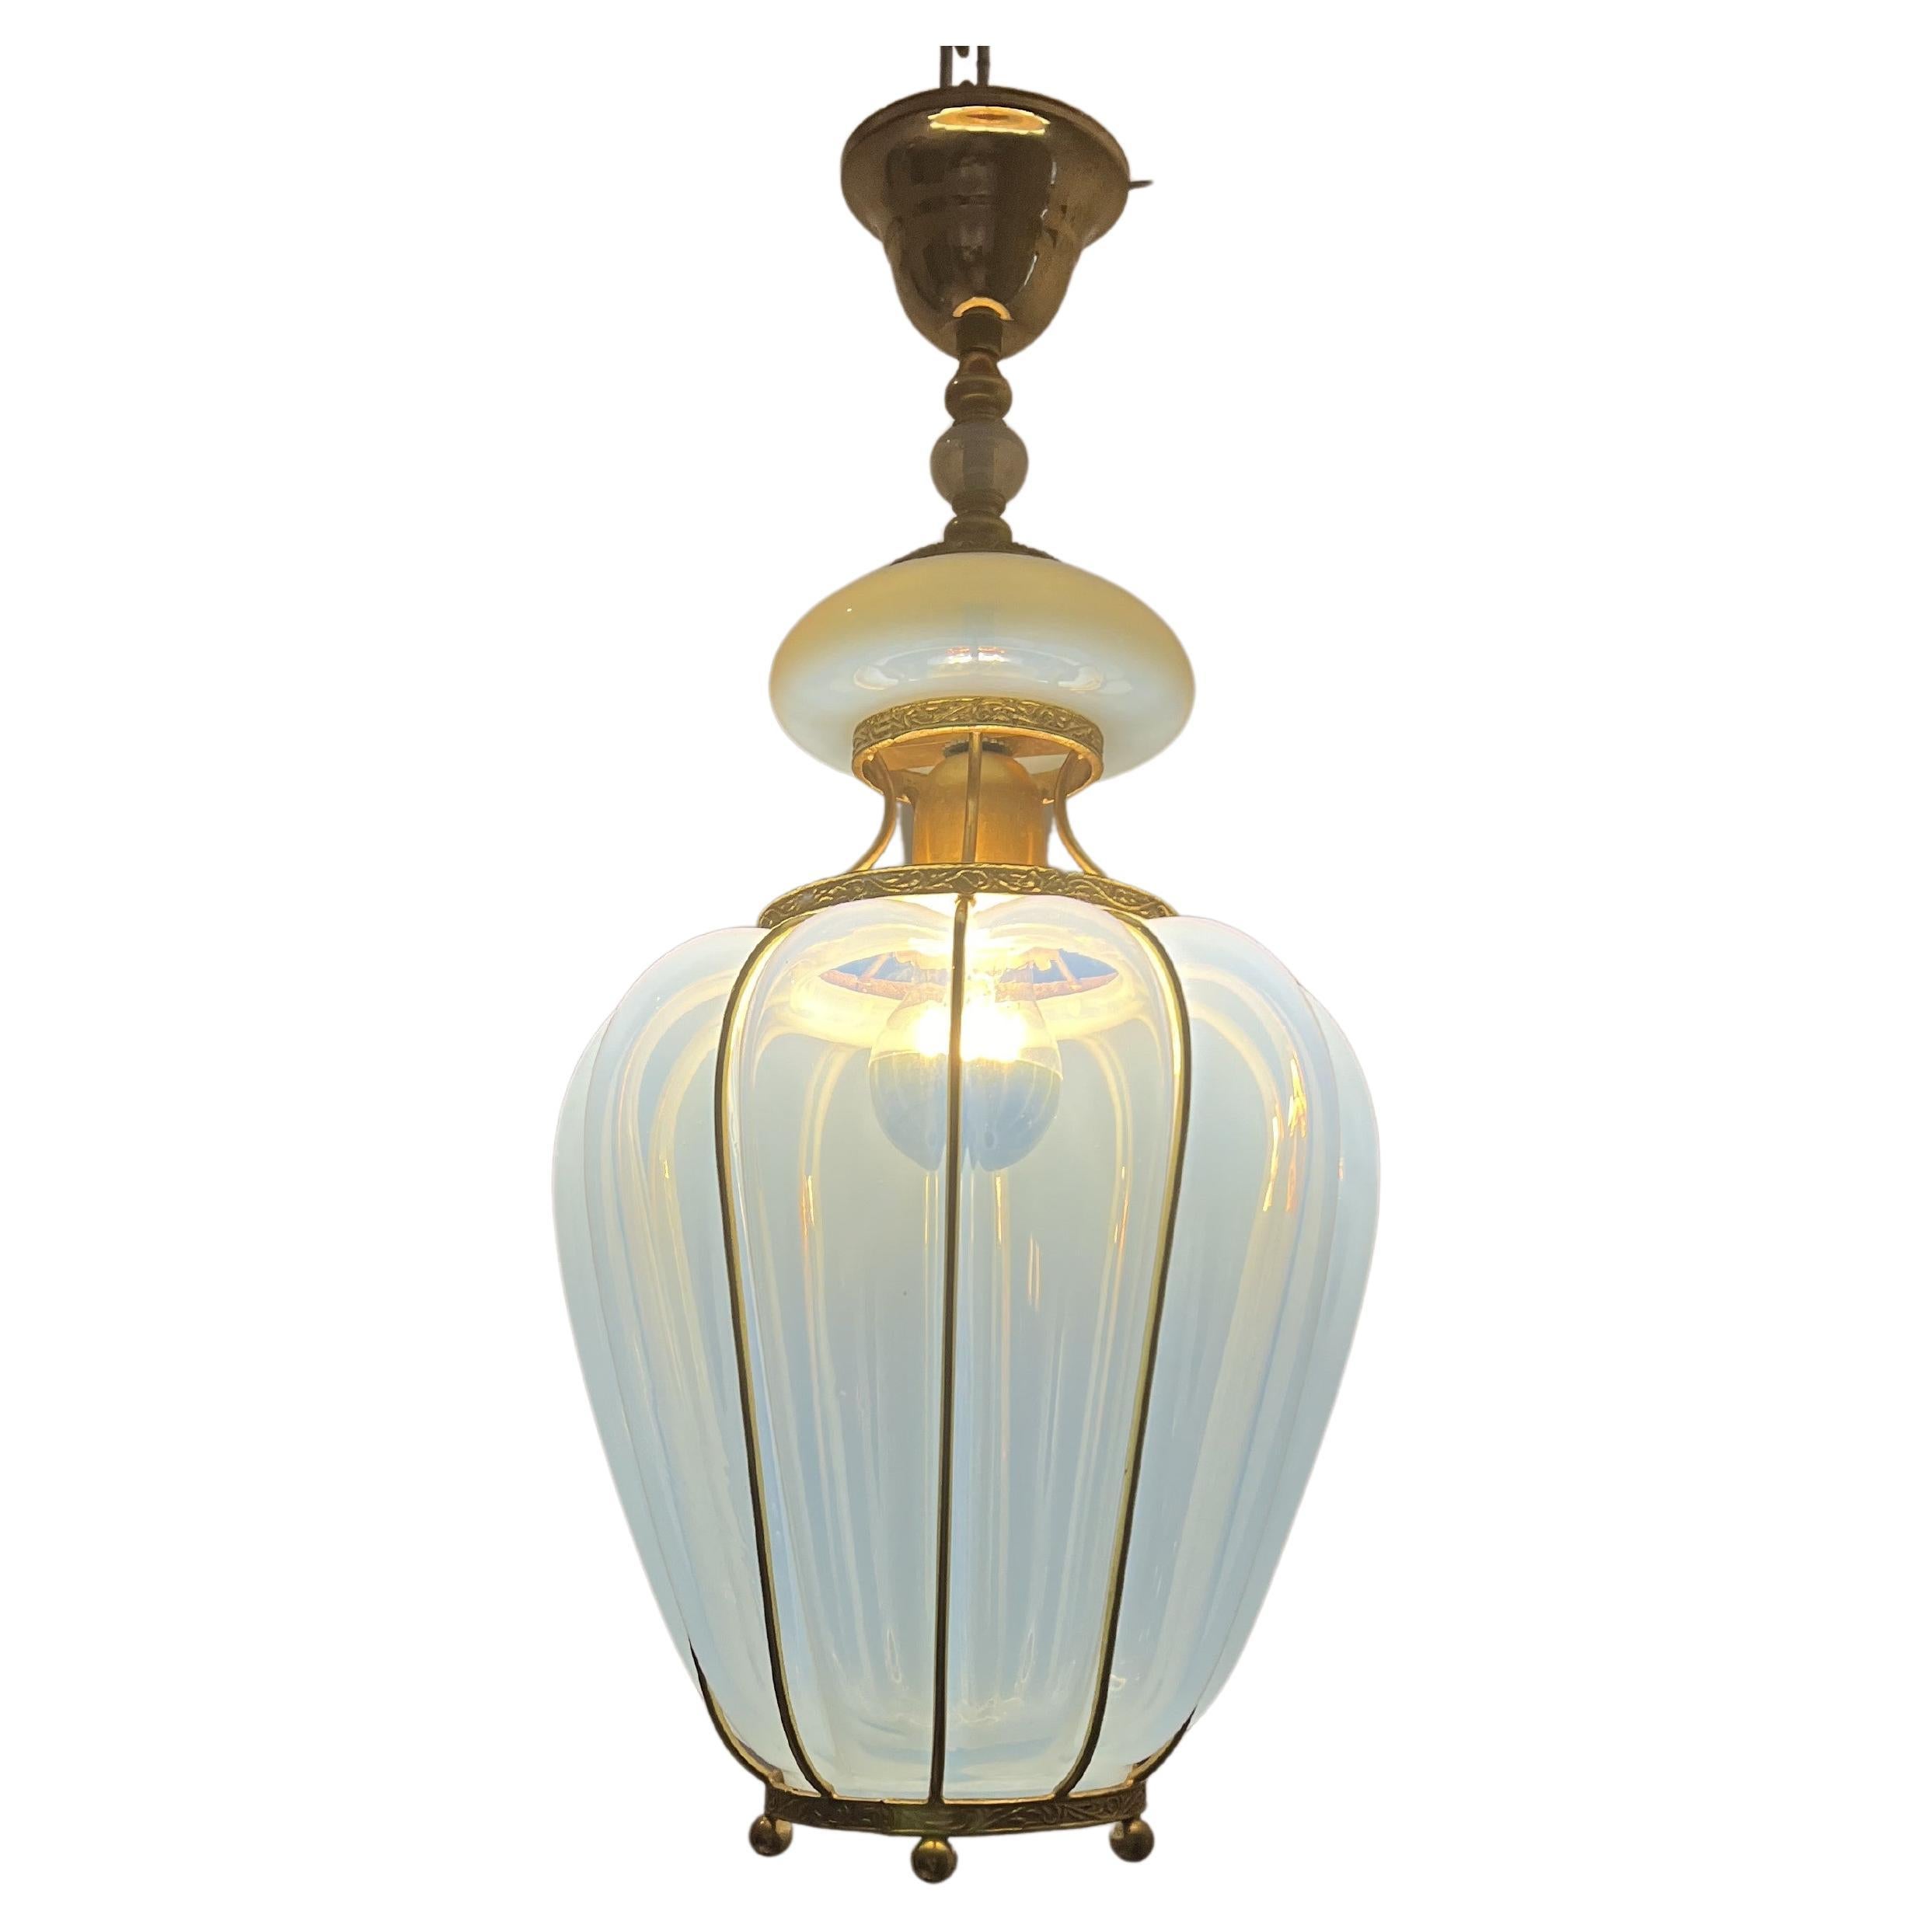 Opalescent Blue & Gold Murano Glass Lantern attr to Barovier Toso, Italy ca 1950